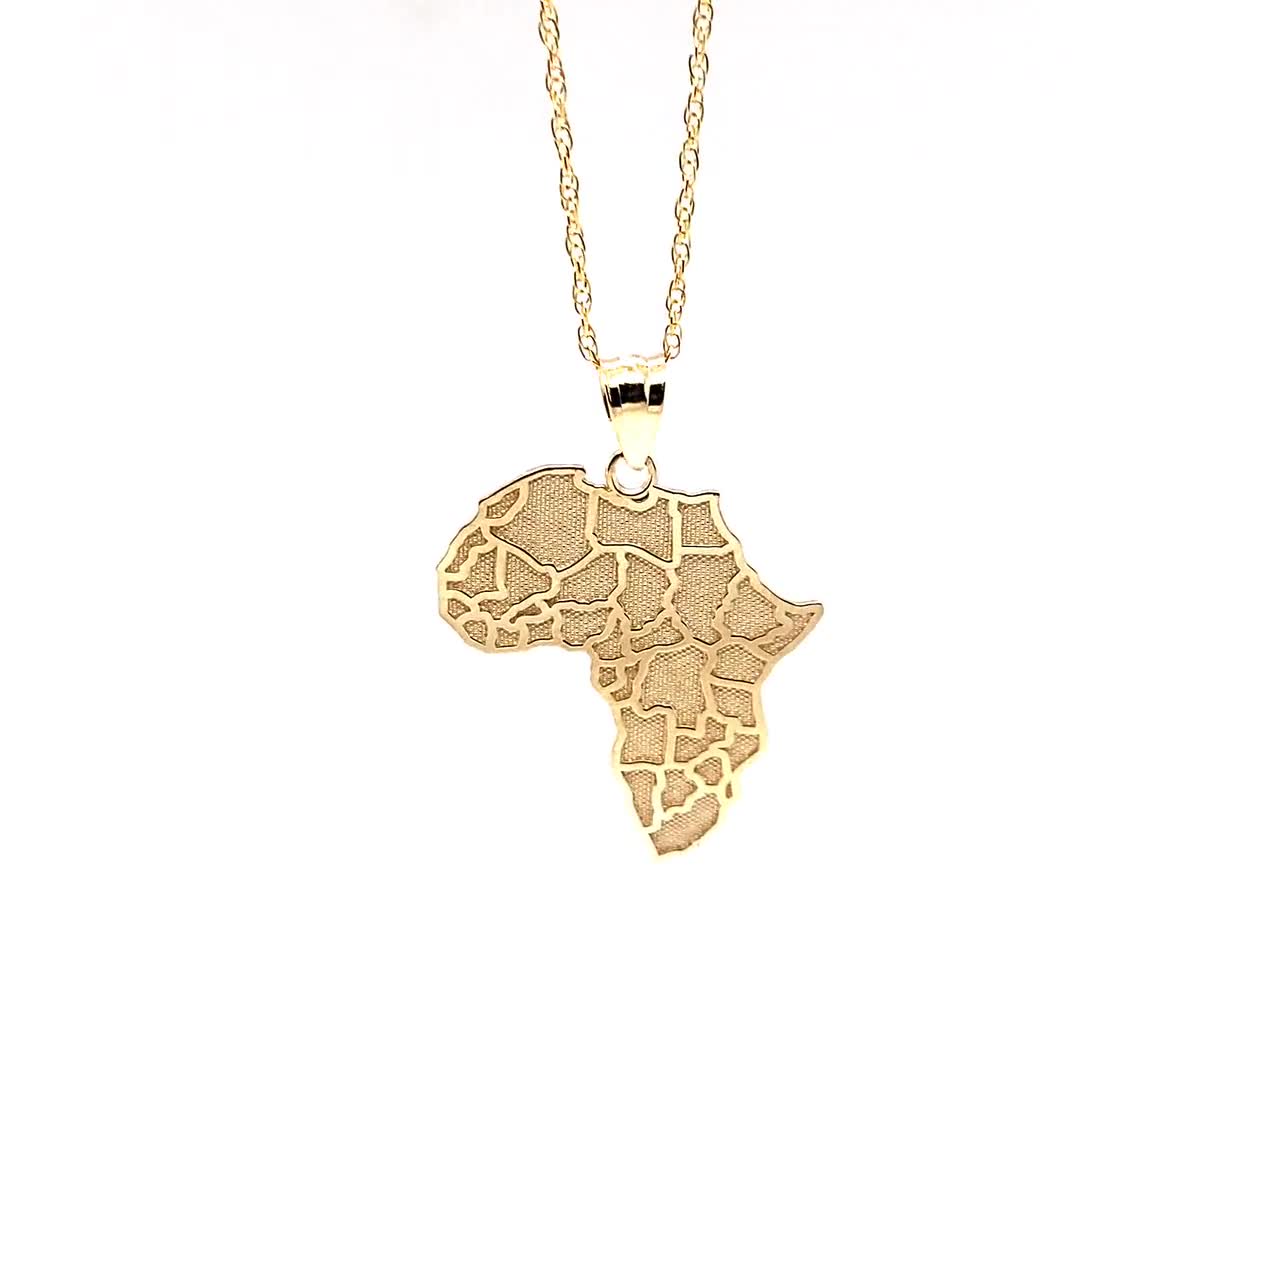 Gold Continent of Africa Charm - Africa Pendant - 10 Karat Solid Gold - Map  of Africa Jewelry - Africa Necklace